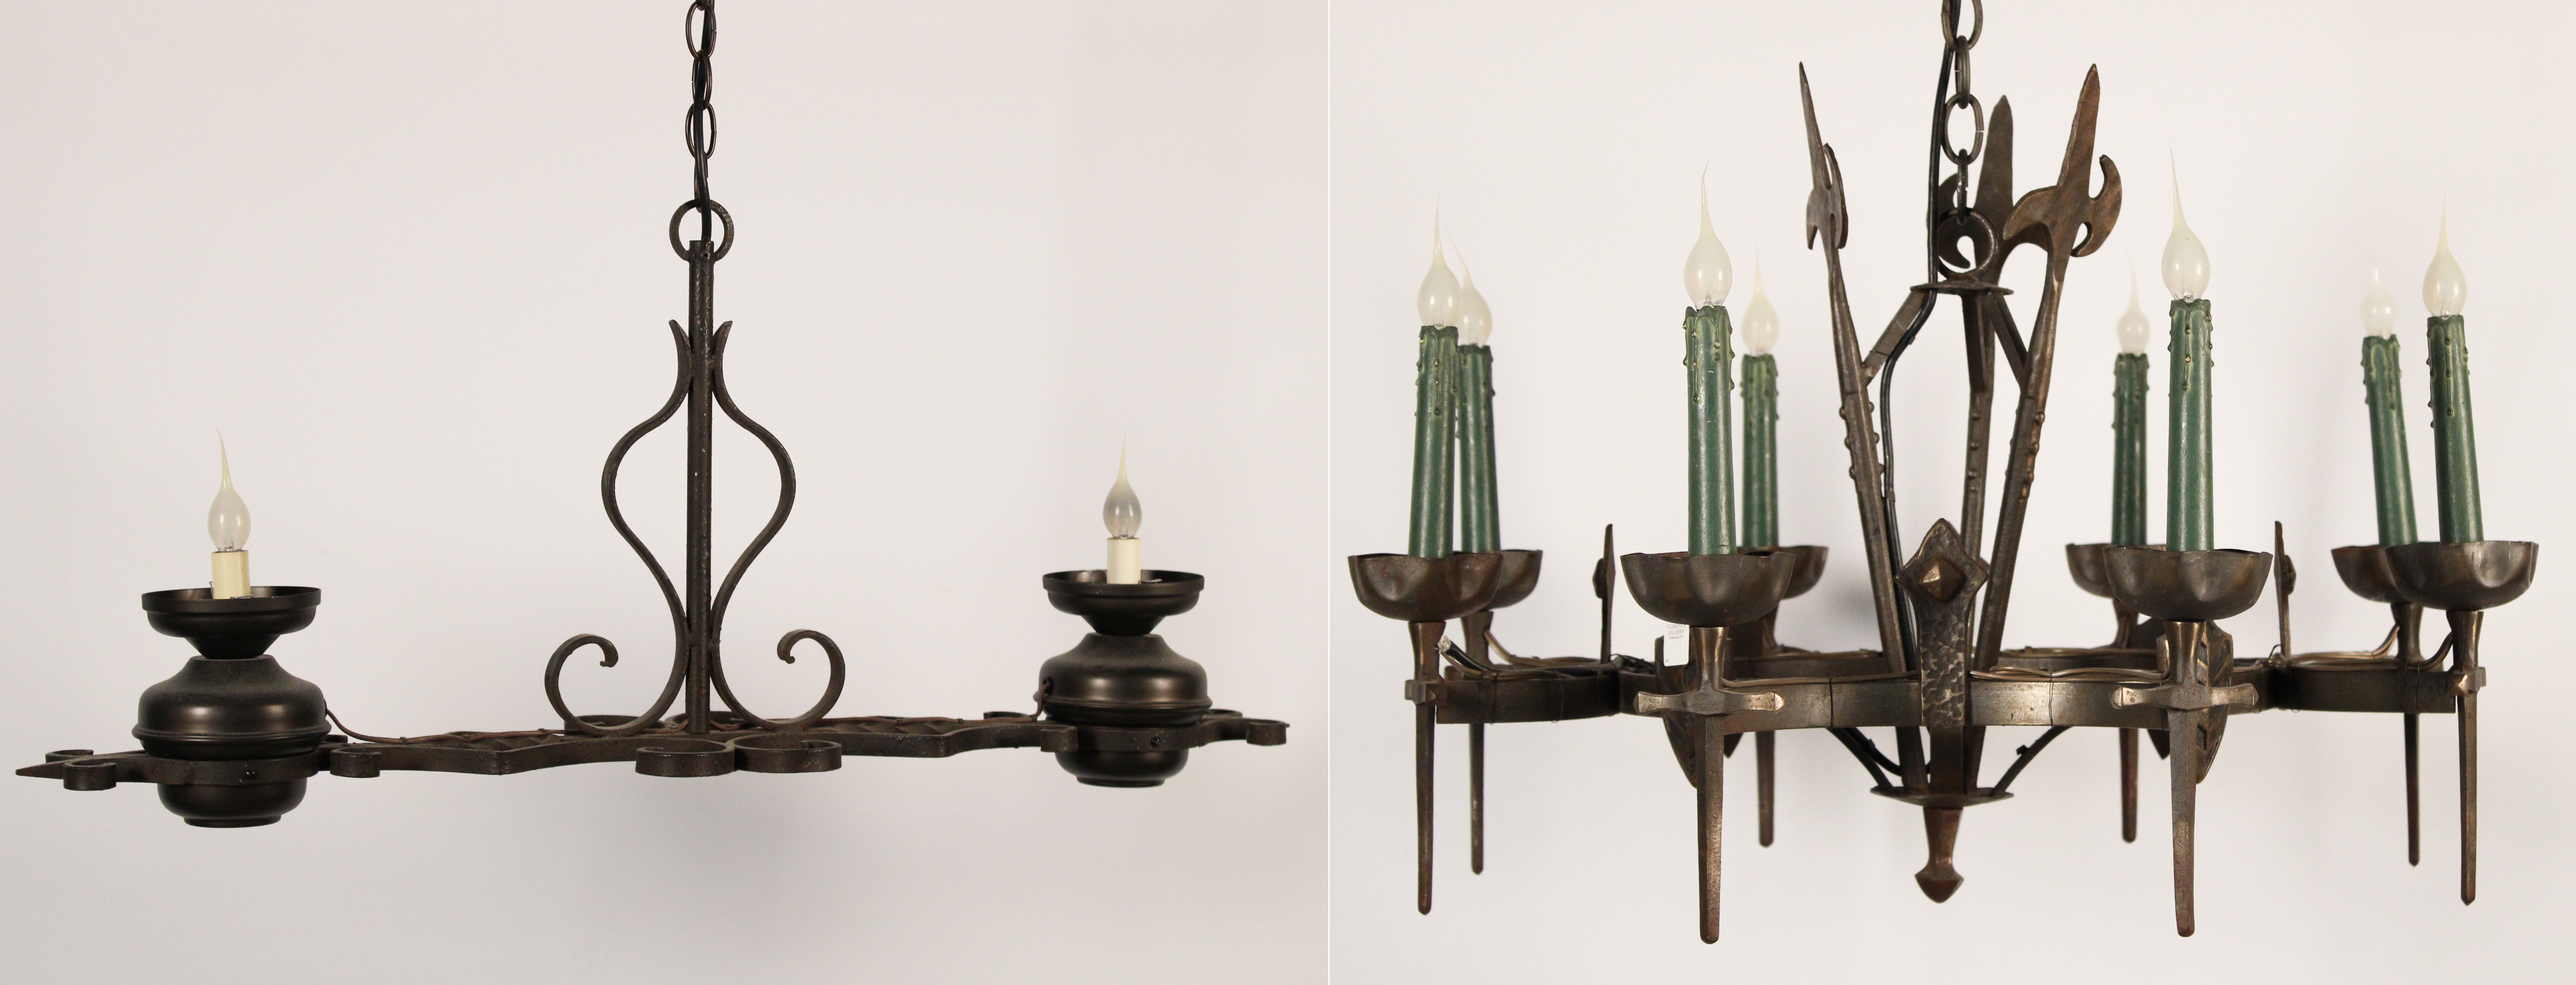 2 MEDIEVAL STYLE IRON CHANDELIERS 35f7b4